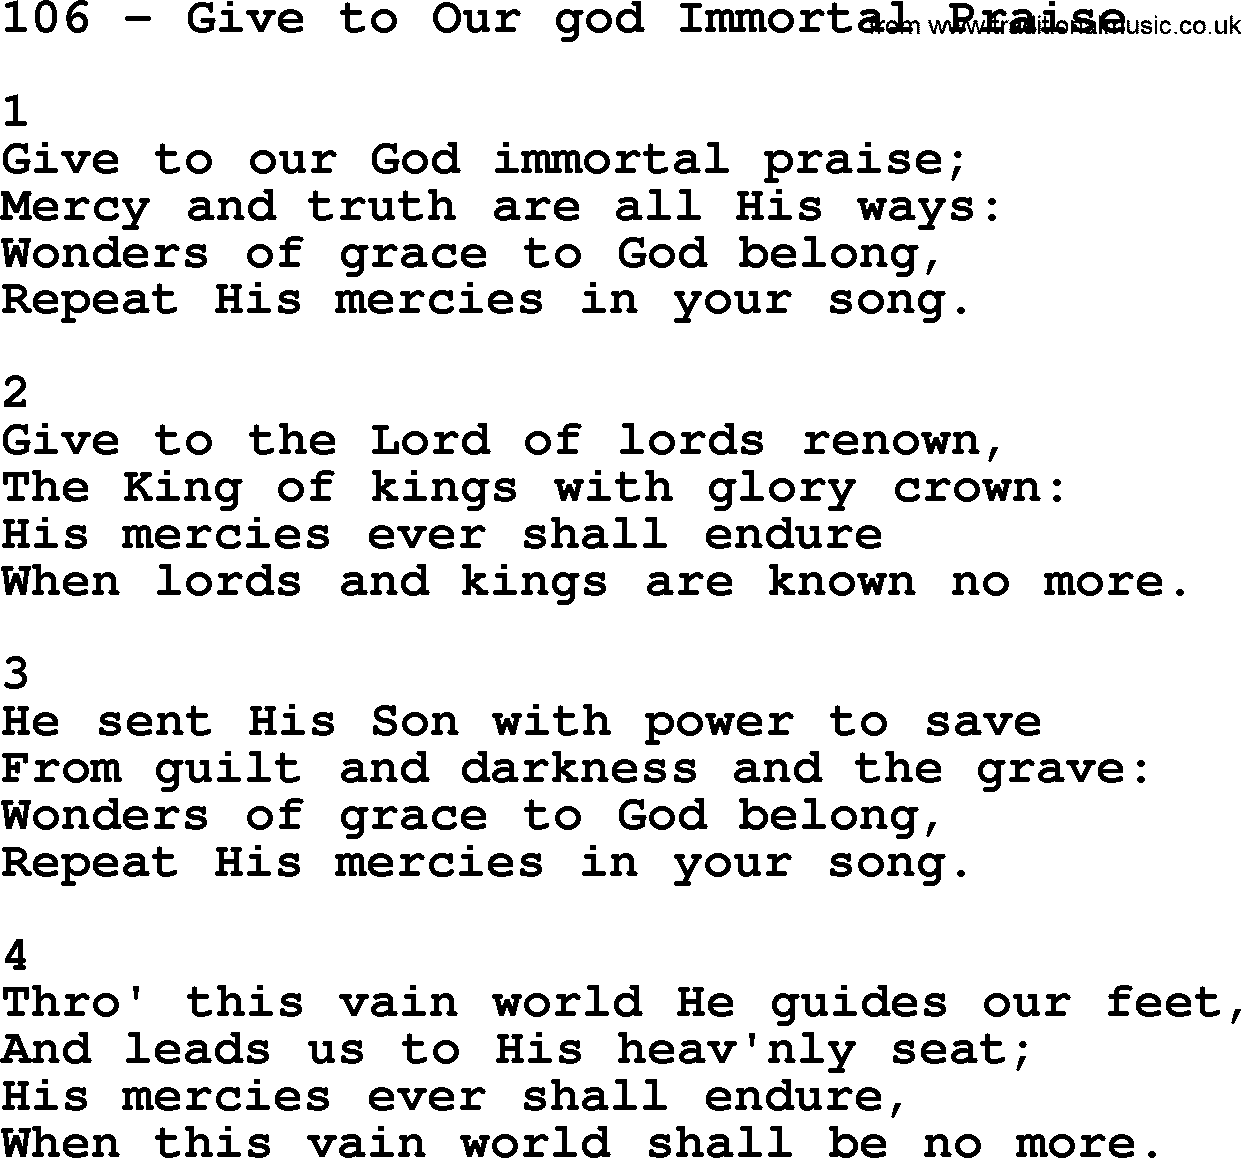 Complete Adventis Hymnal, title: 106-Give To Our God Immortal Praise, with lyrics, midi, mp3, powerpoints(PPT) and PDF,